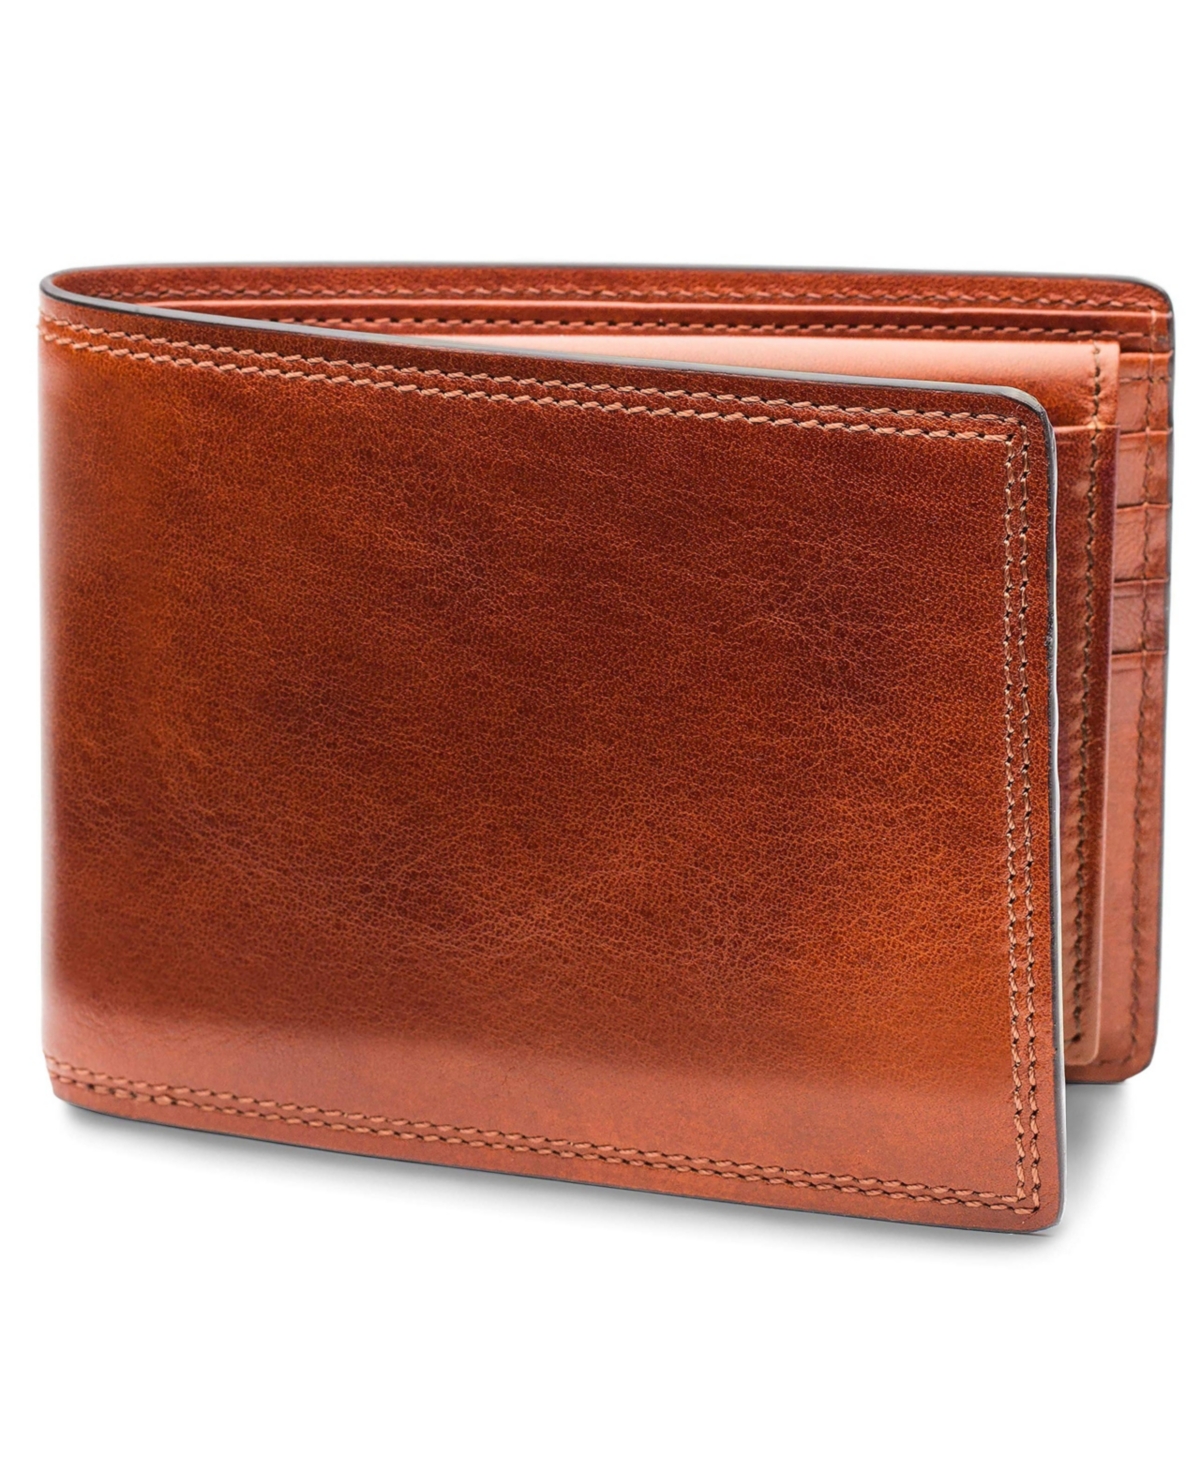 Men's Wallet, Dolce Leather Credit Wallet with I.d. Passcase - Amber